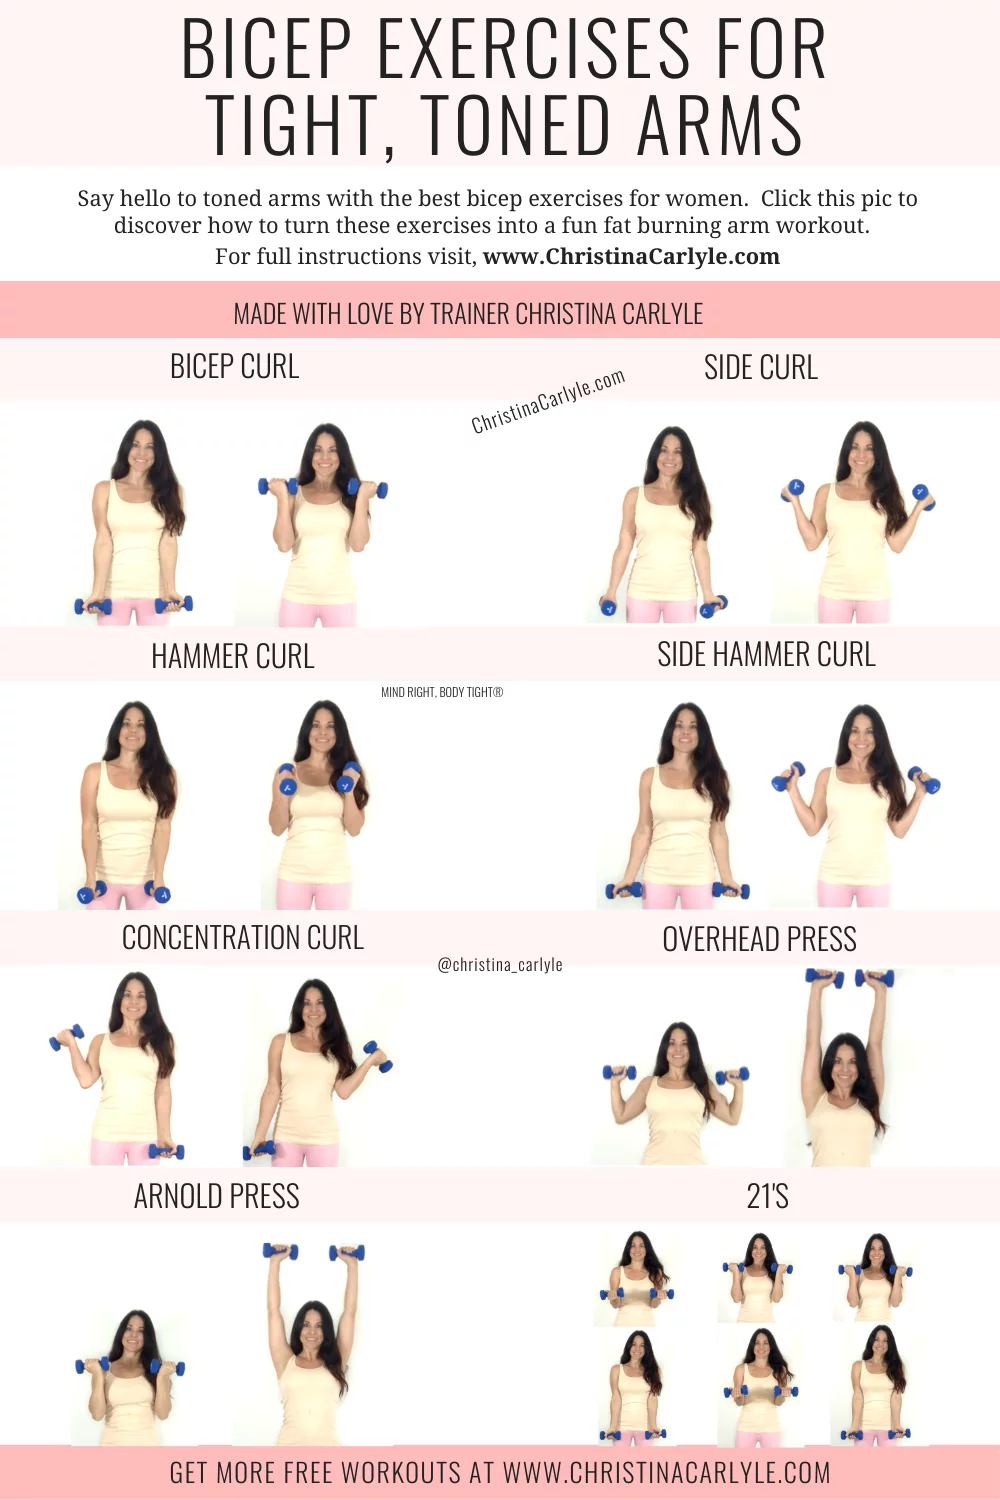 8 Bicep Exercises being done in a Bicep Workout by Trainer Christina Carlyle and text that says the best bicep exercises for tight, toned arms ASAP